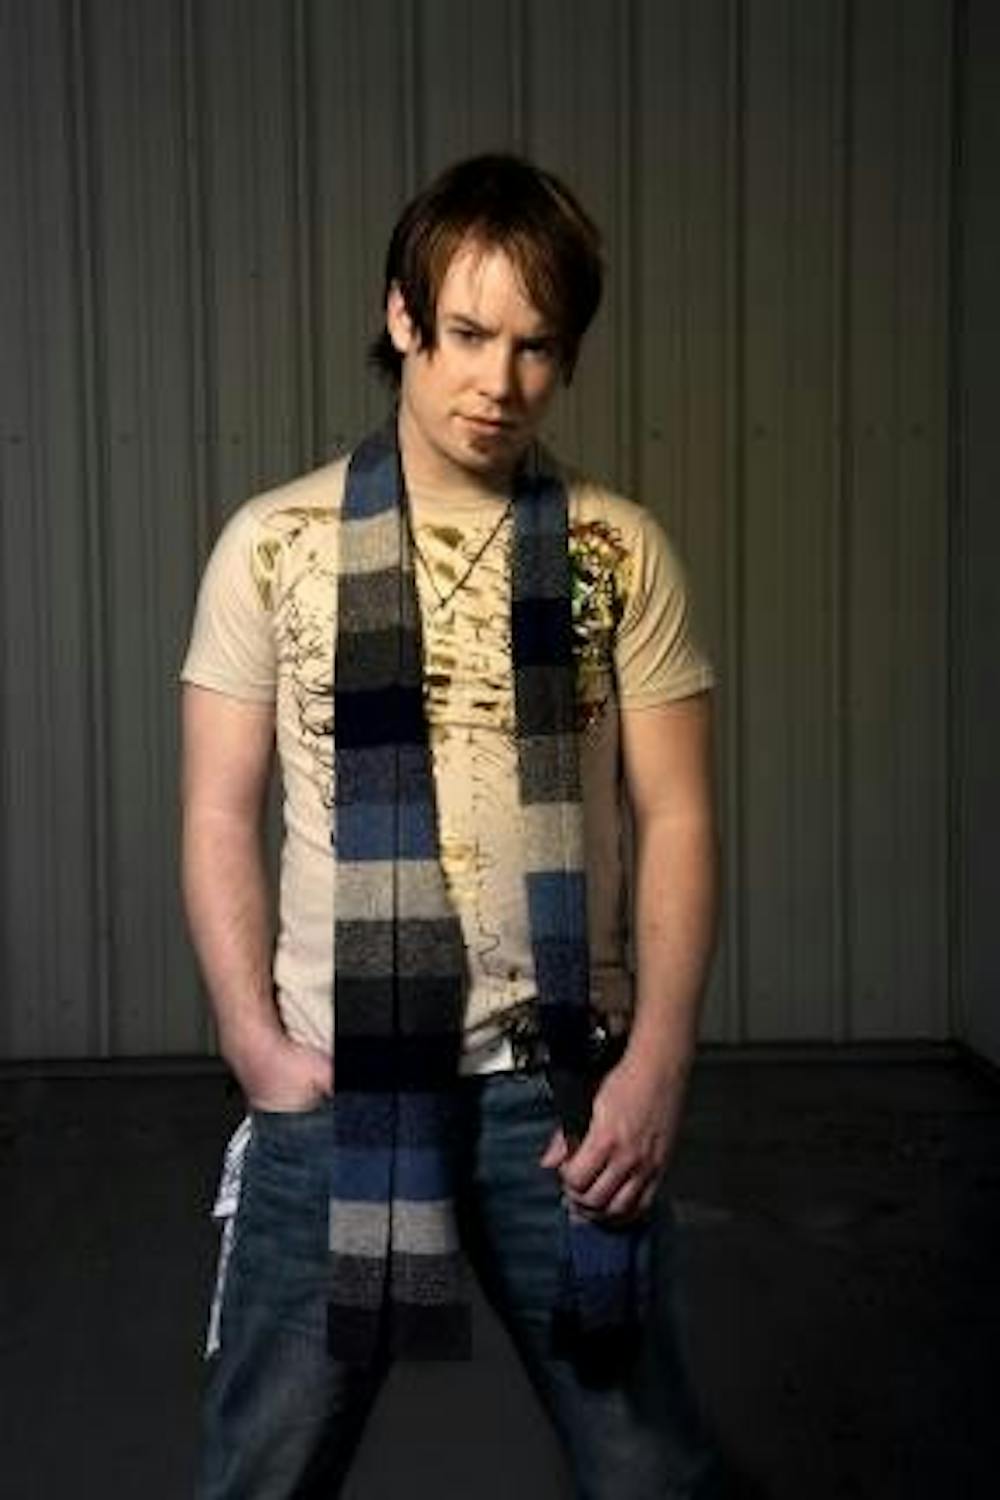 David Cook is clearly one of the tougher "American Idol" competitors. 